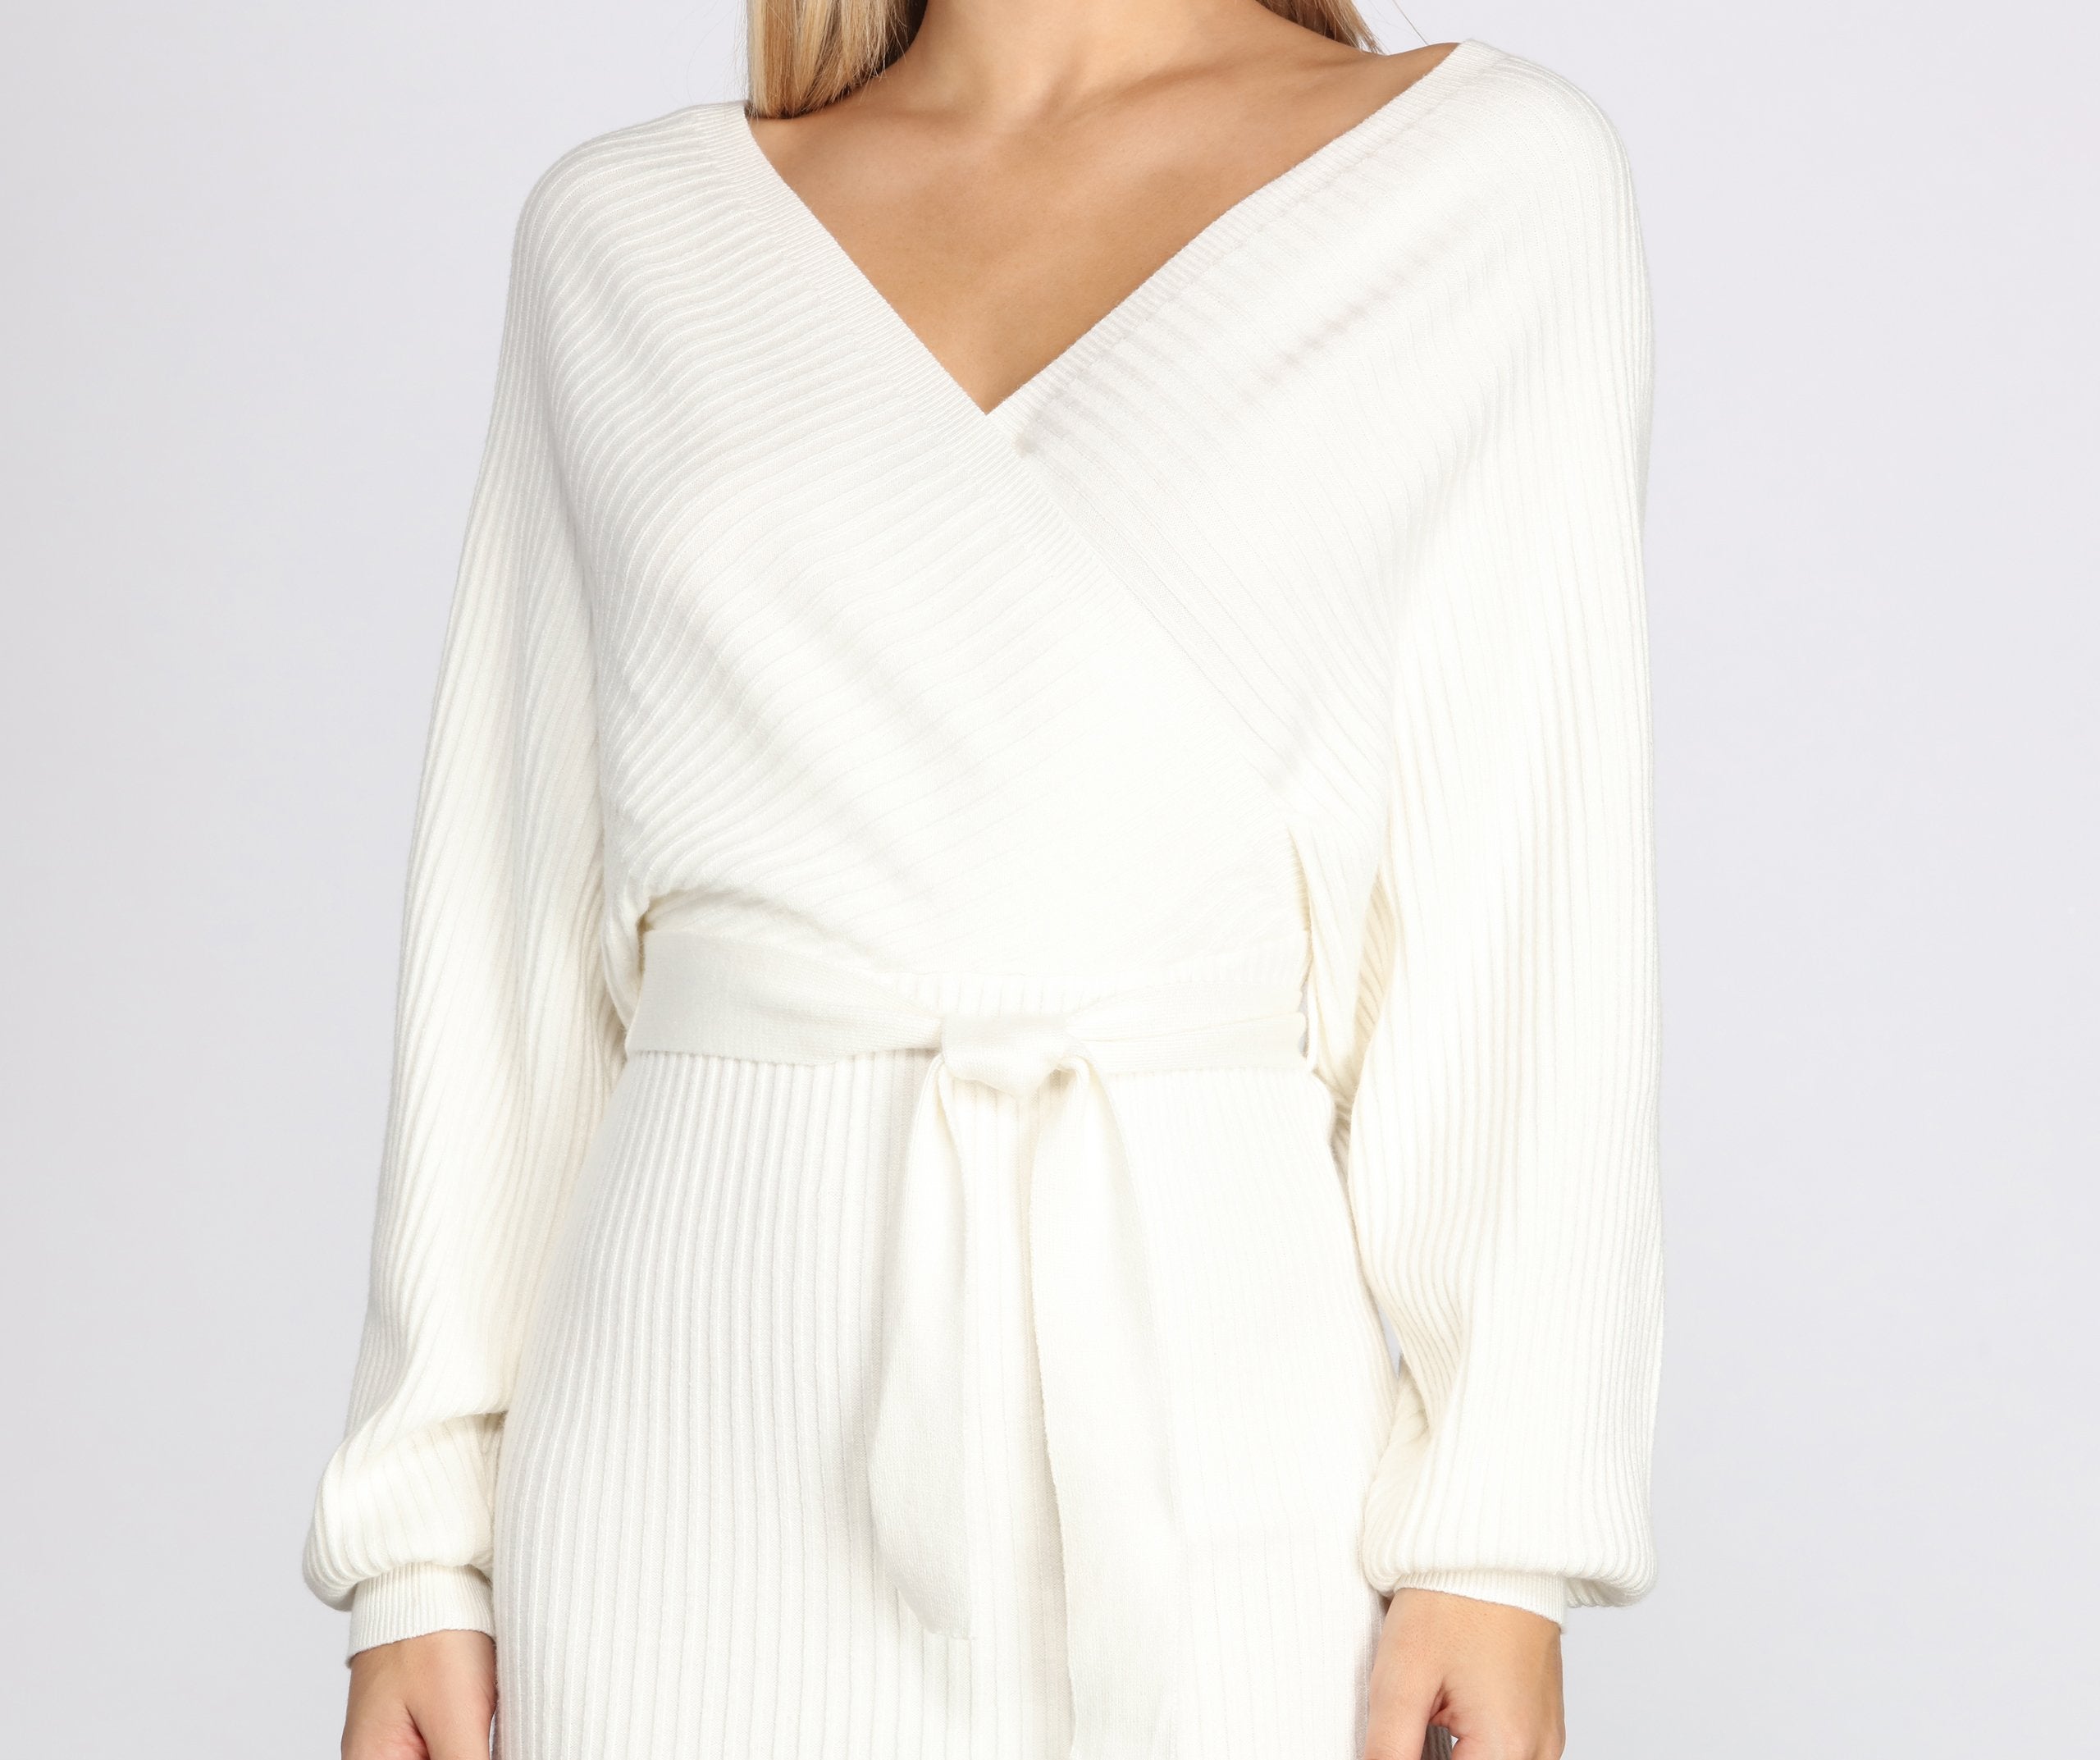 Can't V Bothered Sweater Dress - Lady Occasions